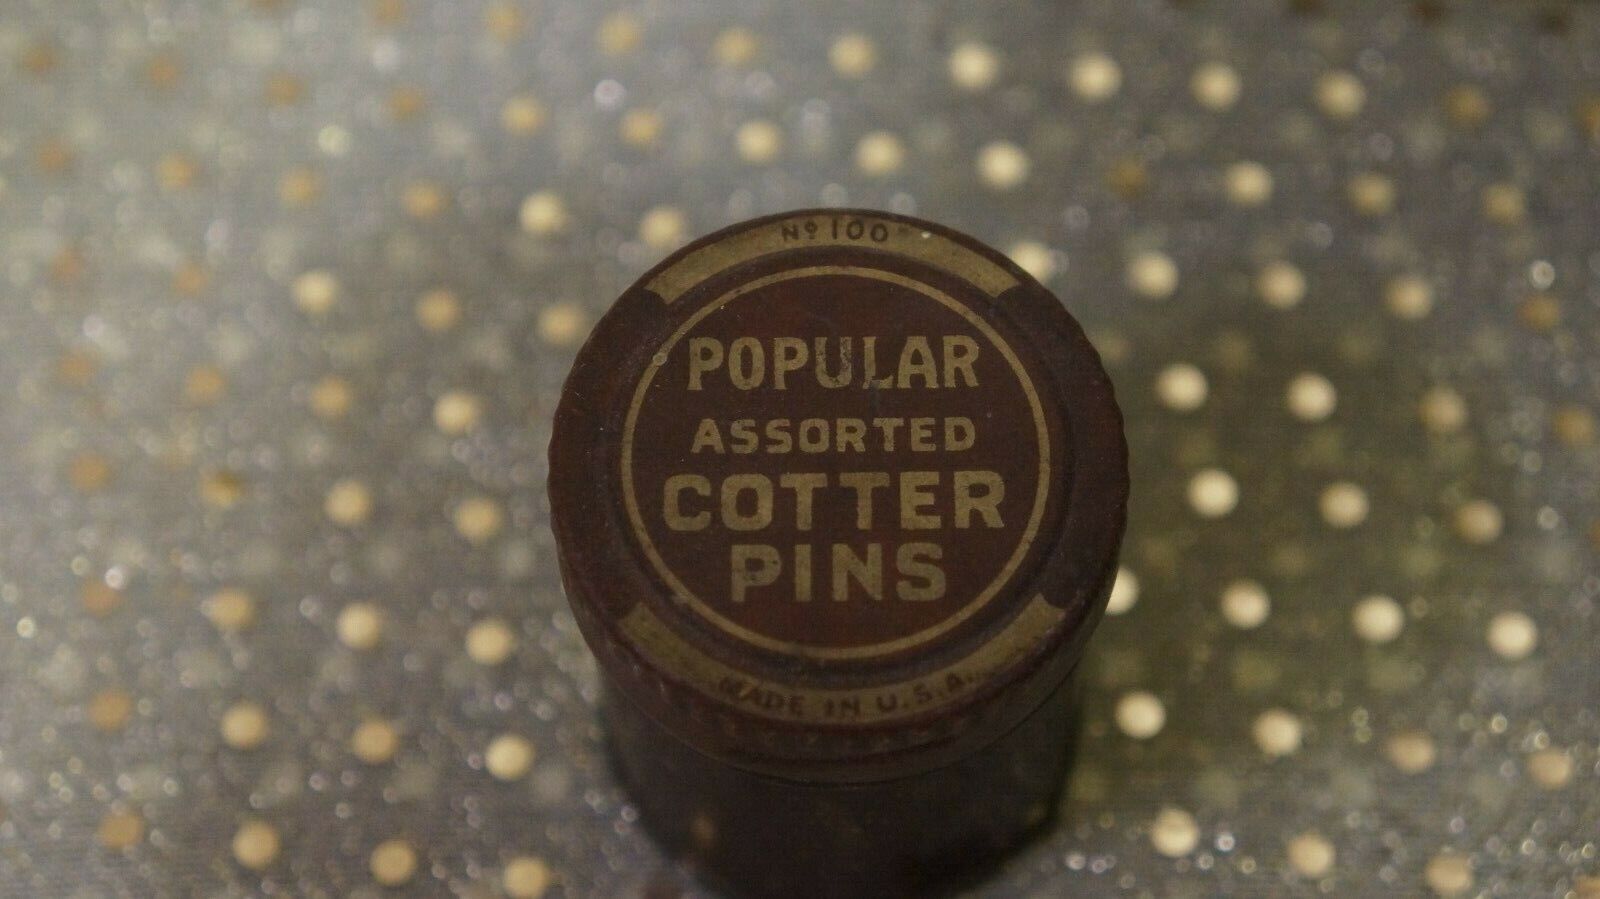 Vintage 1920s Popular Assorted Cotter Pins Metal Advertising Tin Can 